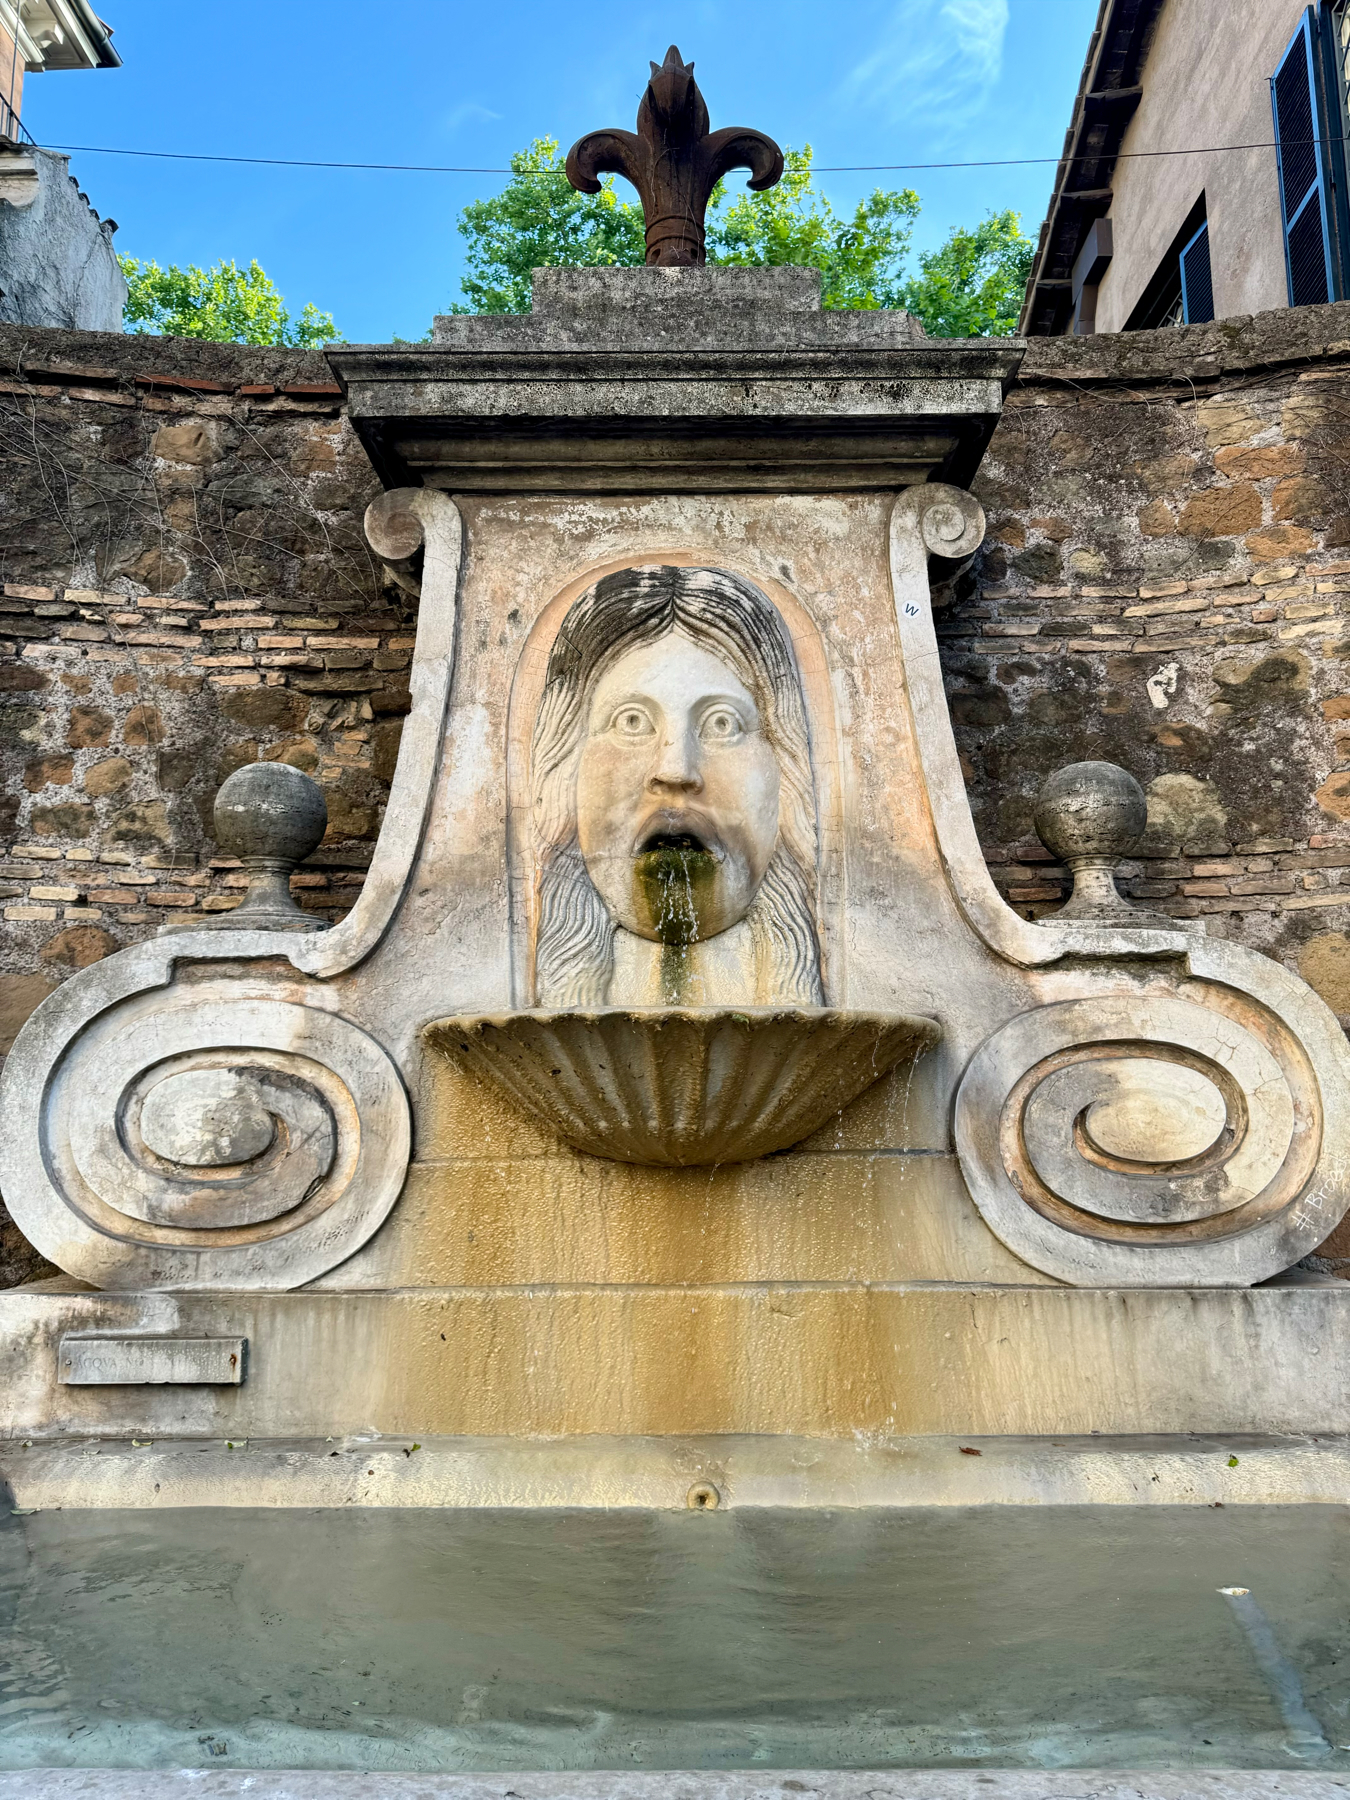 A stone fountain with a grotesque face sculpture has water flowing from its mouth into a basin below. The backdrop includes an old brick wall and parts of nearby buildings, with green trees and a blue sky in the background.